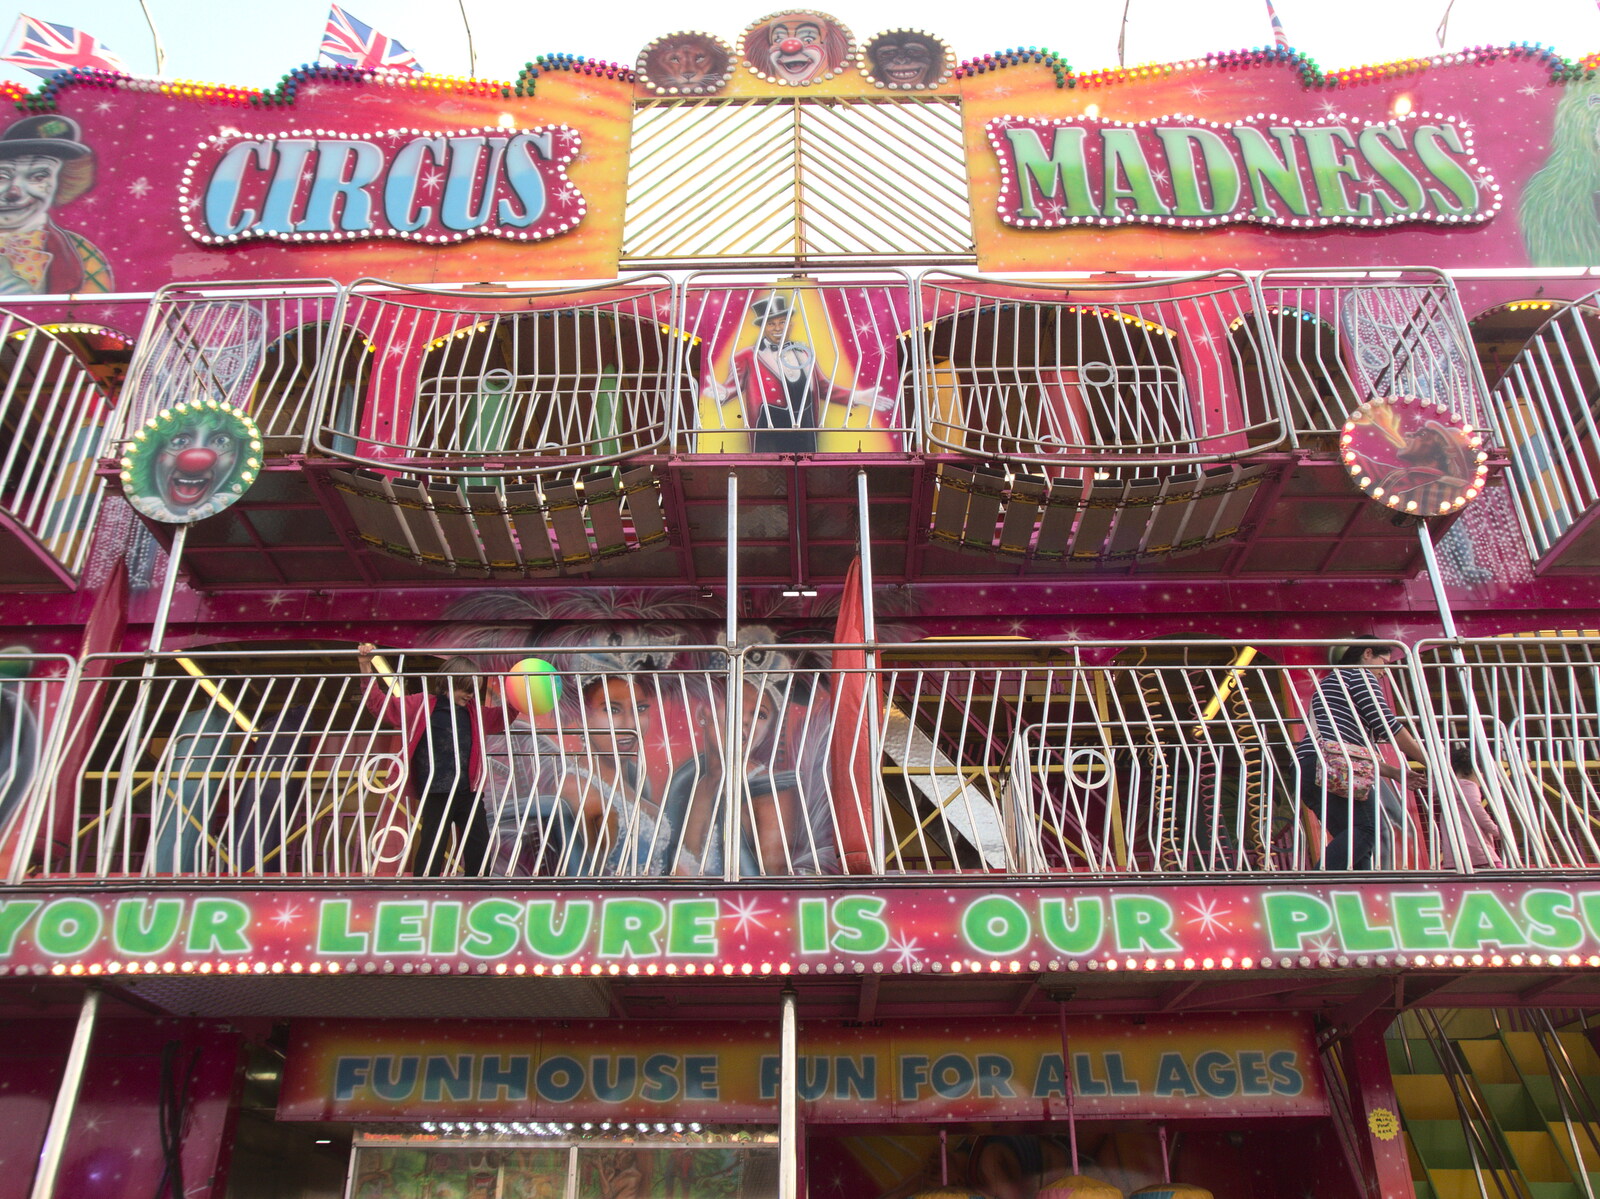 Harry on the funhouse from A Few Hours at the Fair, Fair Green, Diss, Norfolk - 5th September 2021